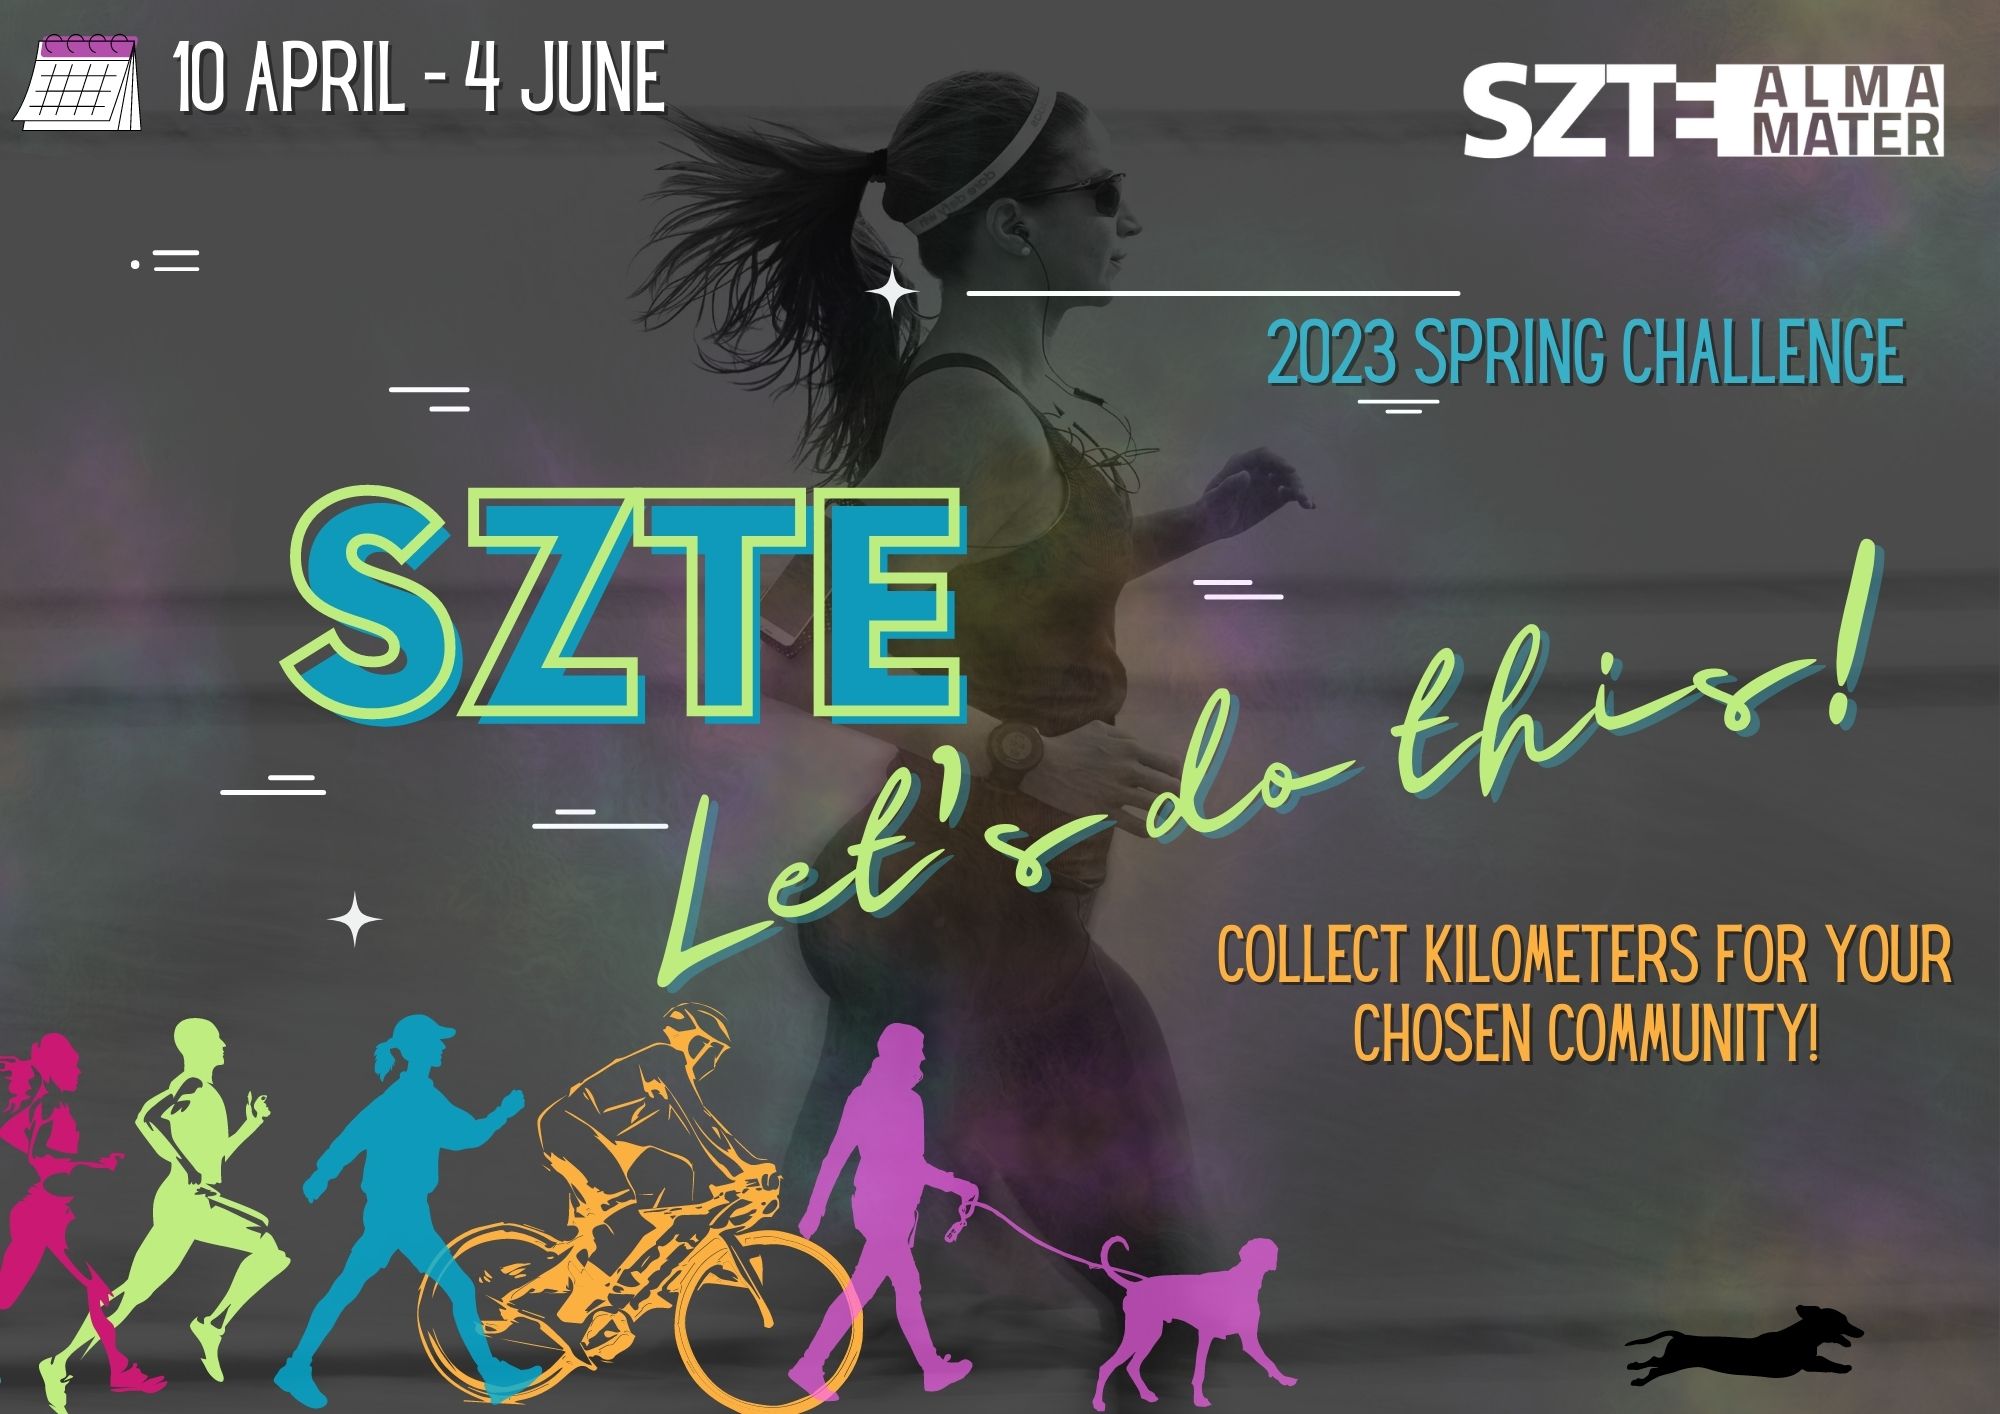 SZTE Let’s do this! - 2023 Spring Challenge